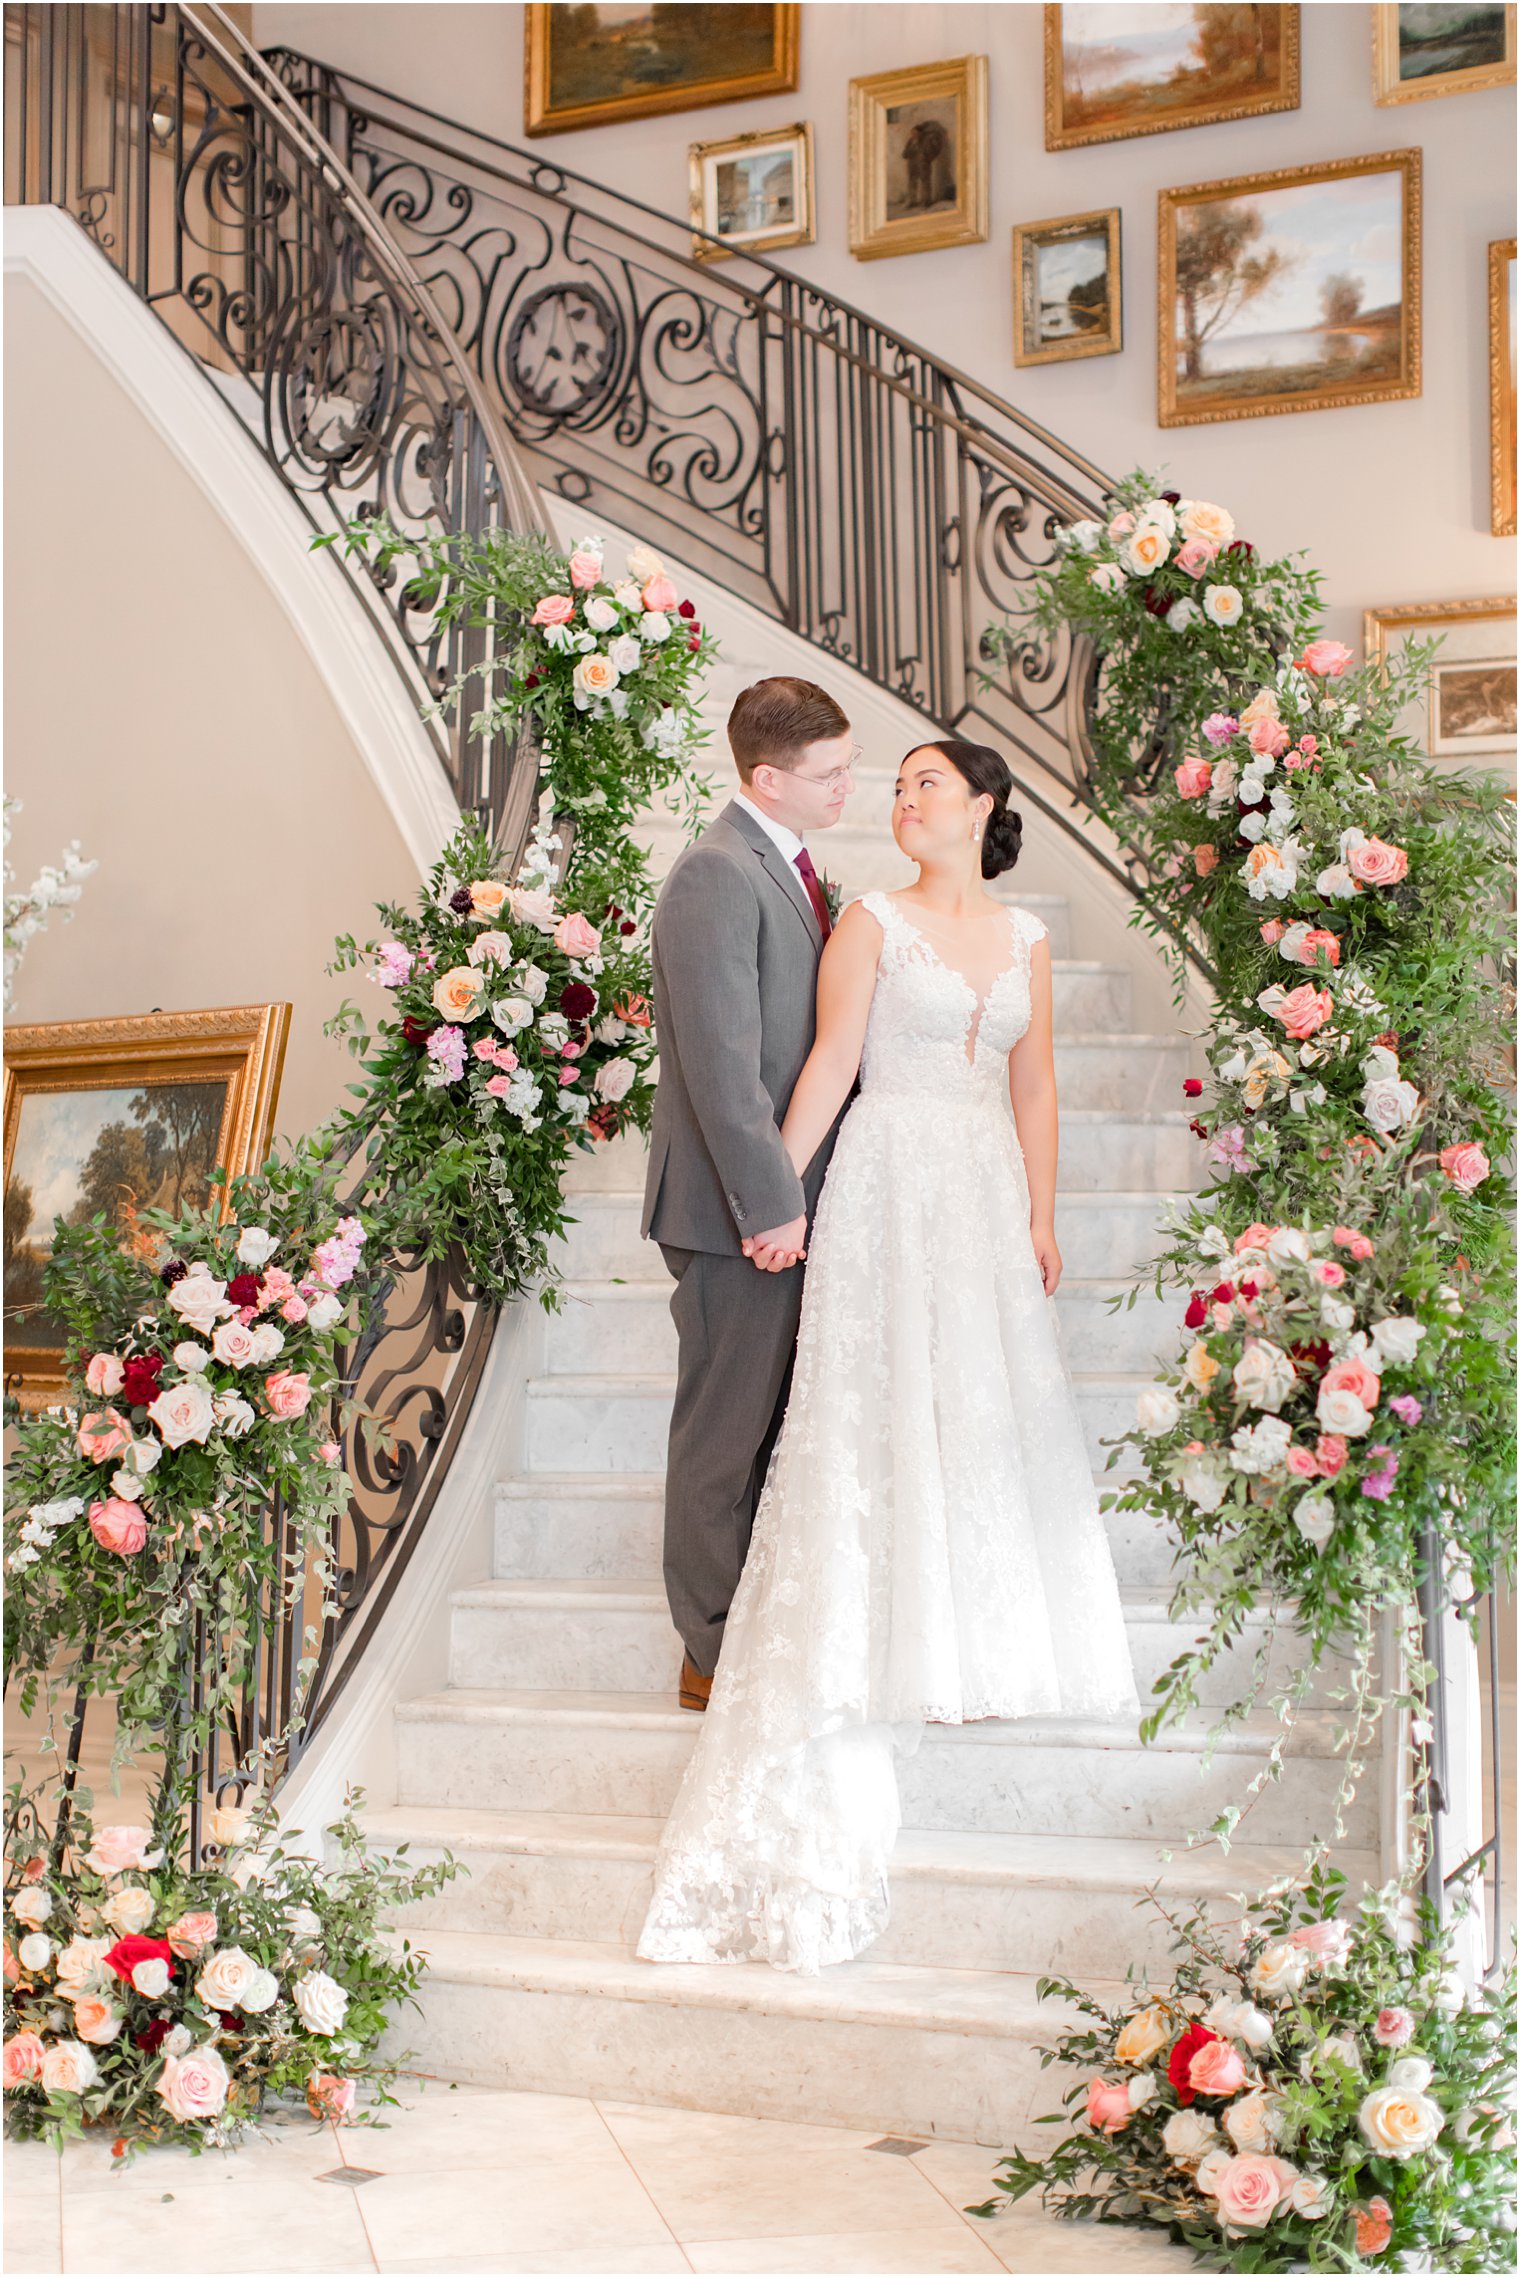 Wedding portraits on staircase at Park Chateau Estate